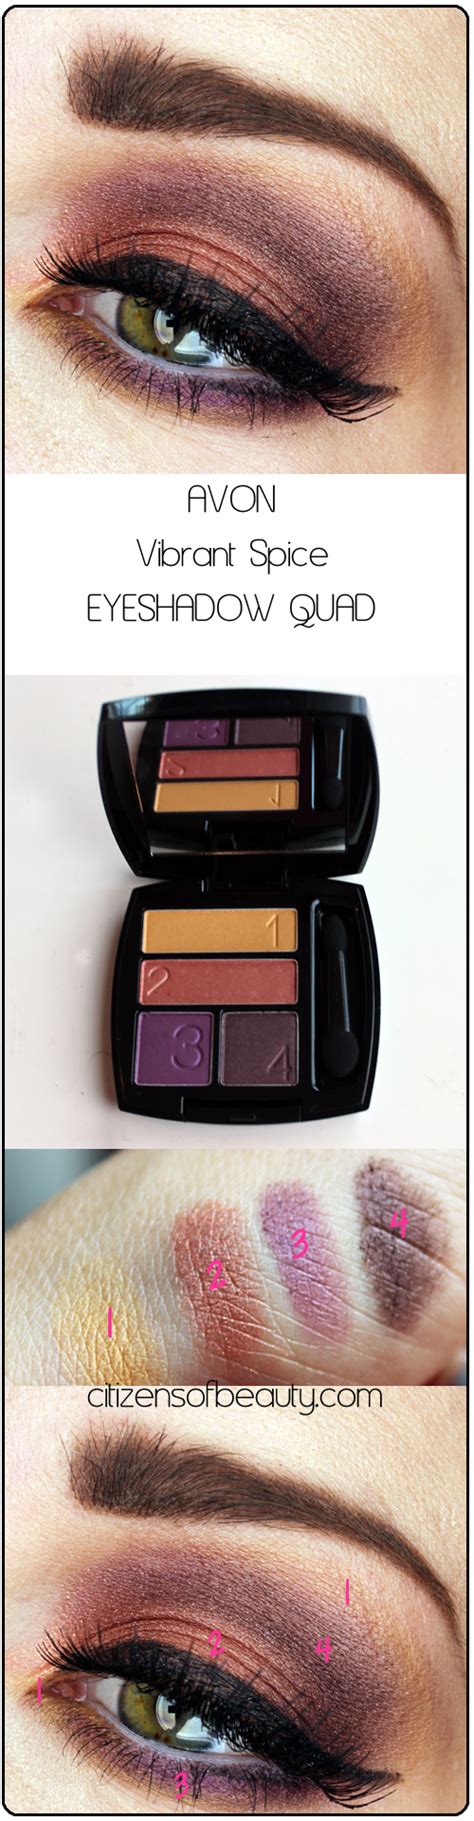 You can buy the avon true color eyeshadow quads for $7 on avon.com, available in 14 shades. Avon Eyeshadow Quads: Shockingly Good